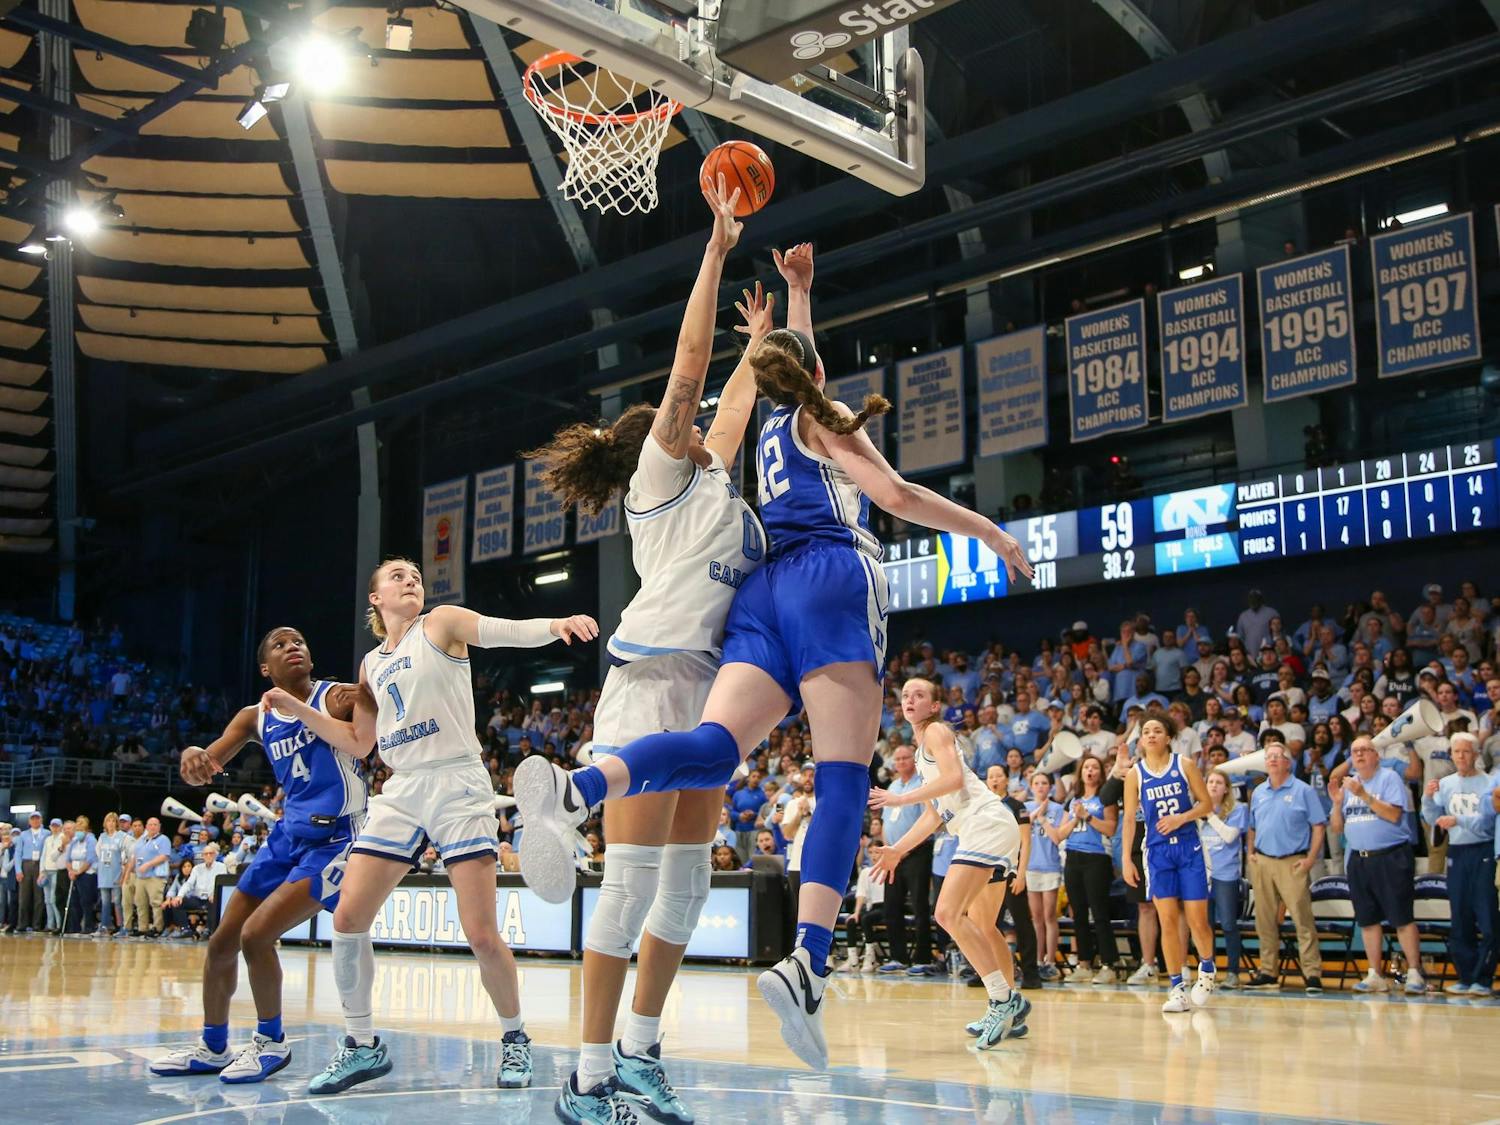 Kennedy Brown races under the basket for a reverse layup attempt against North Carolina.